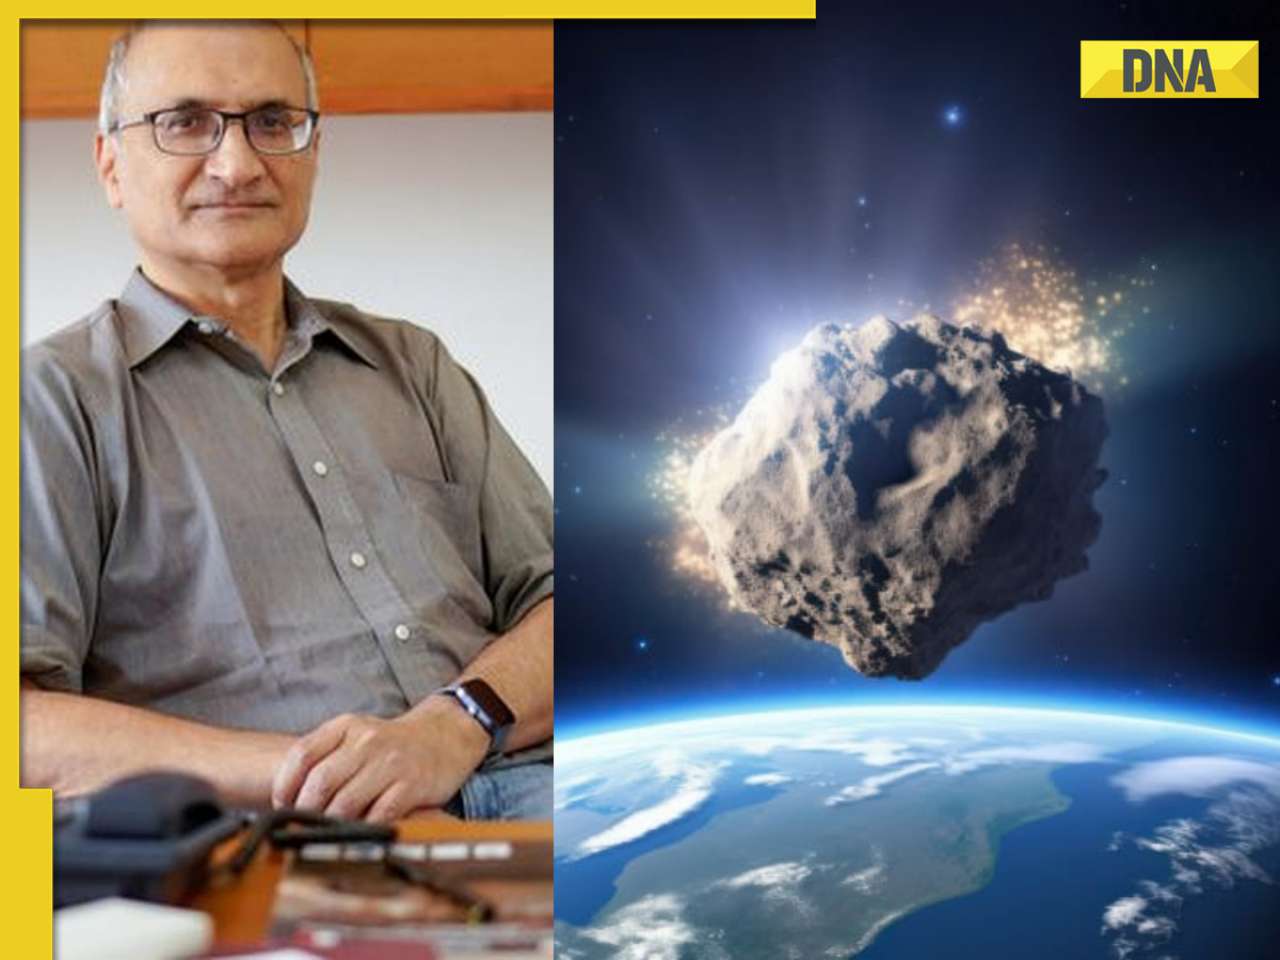 Astronomical Union names asteroid 'Jayantmurthy' in honor of Indian scientist